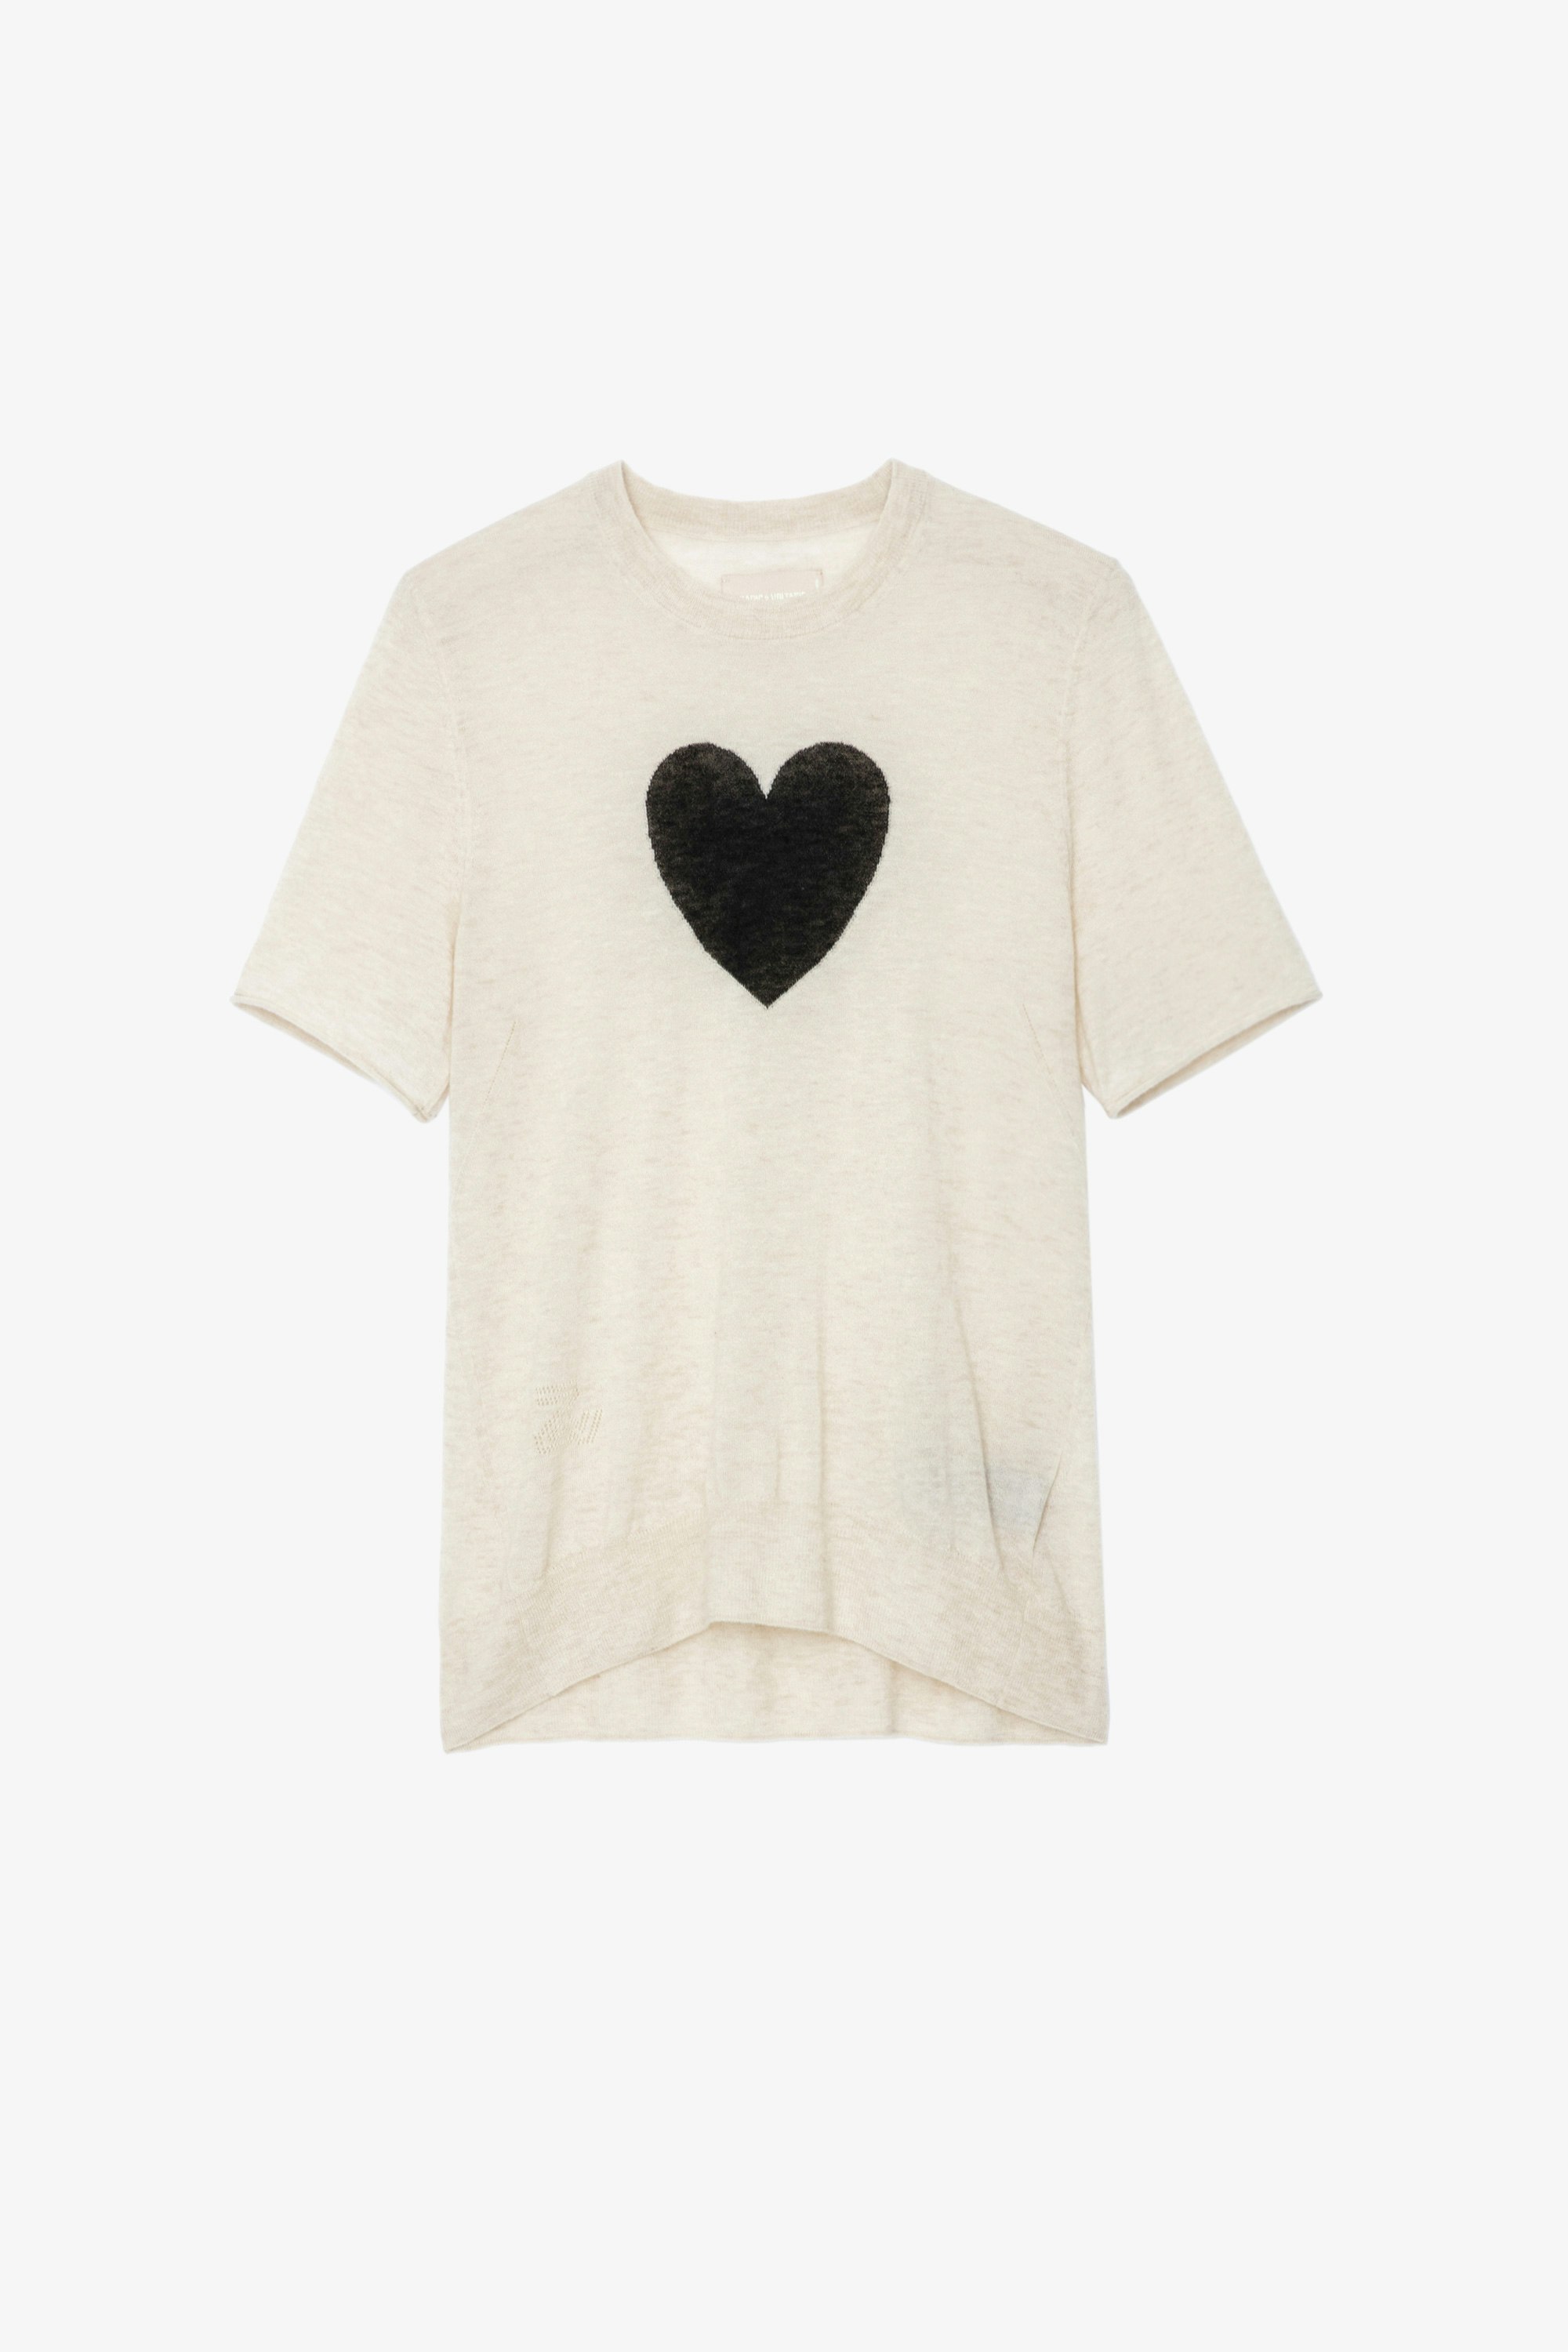 Ida カシミヤ ニット Women’s ecru feather cashmere jumper with contrasting heart